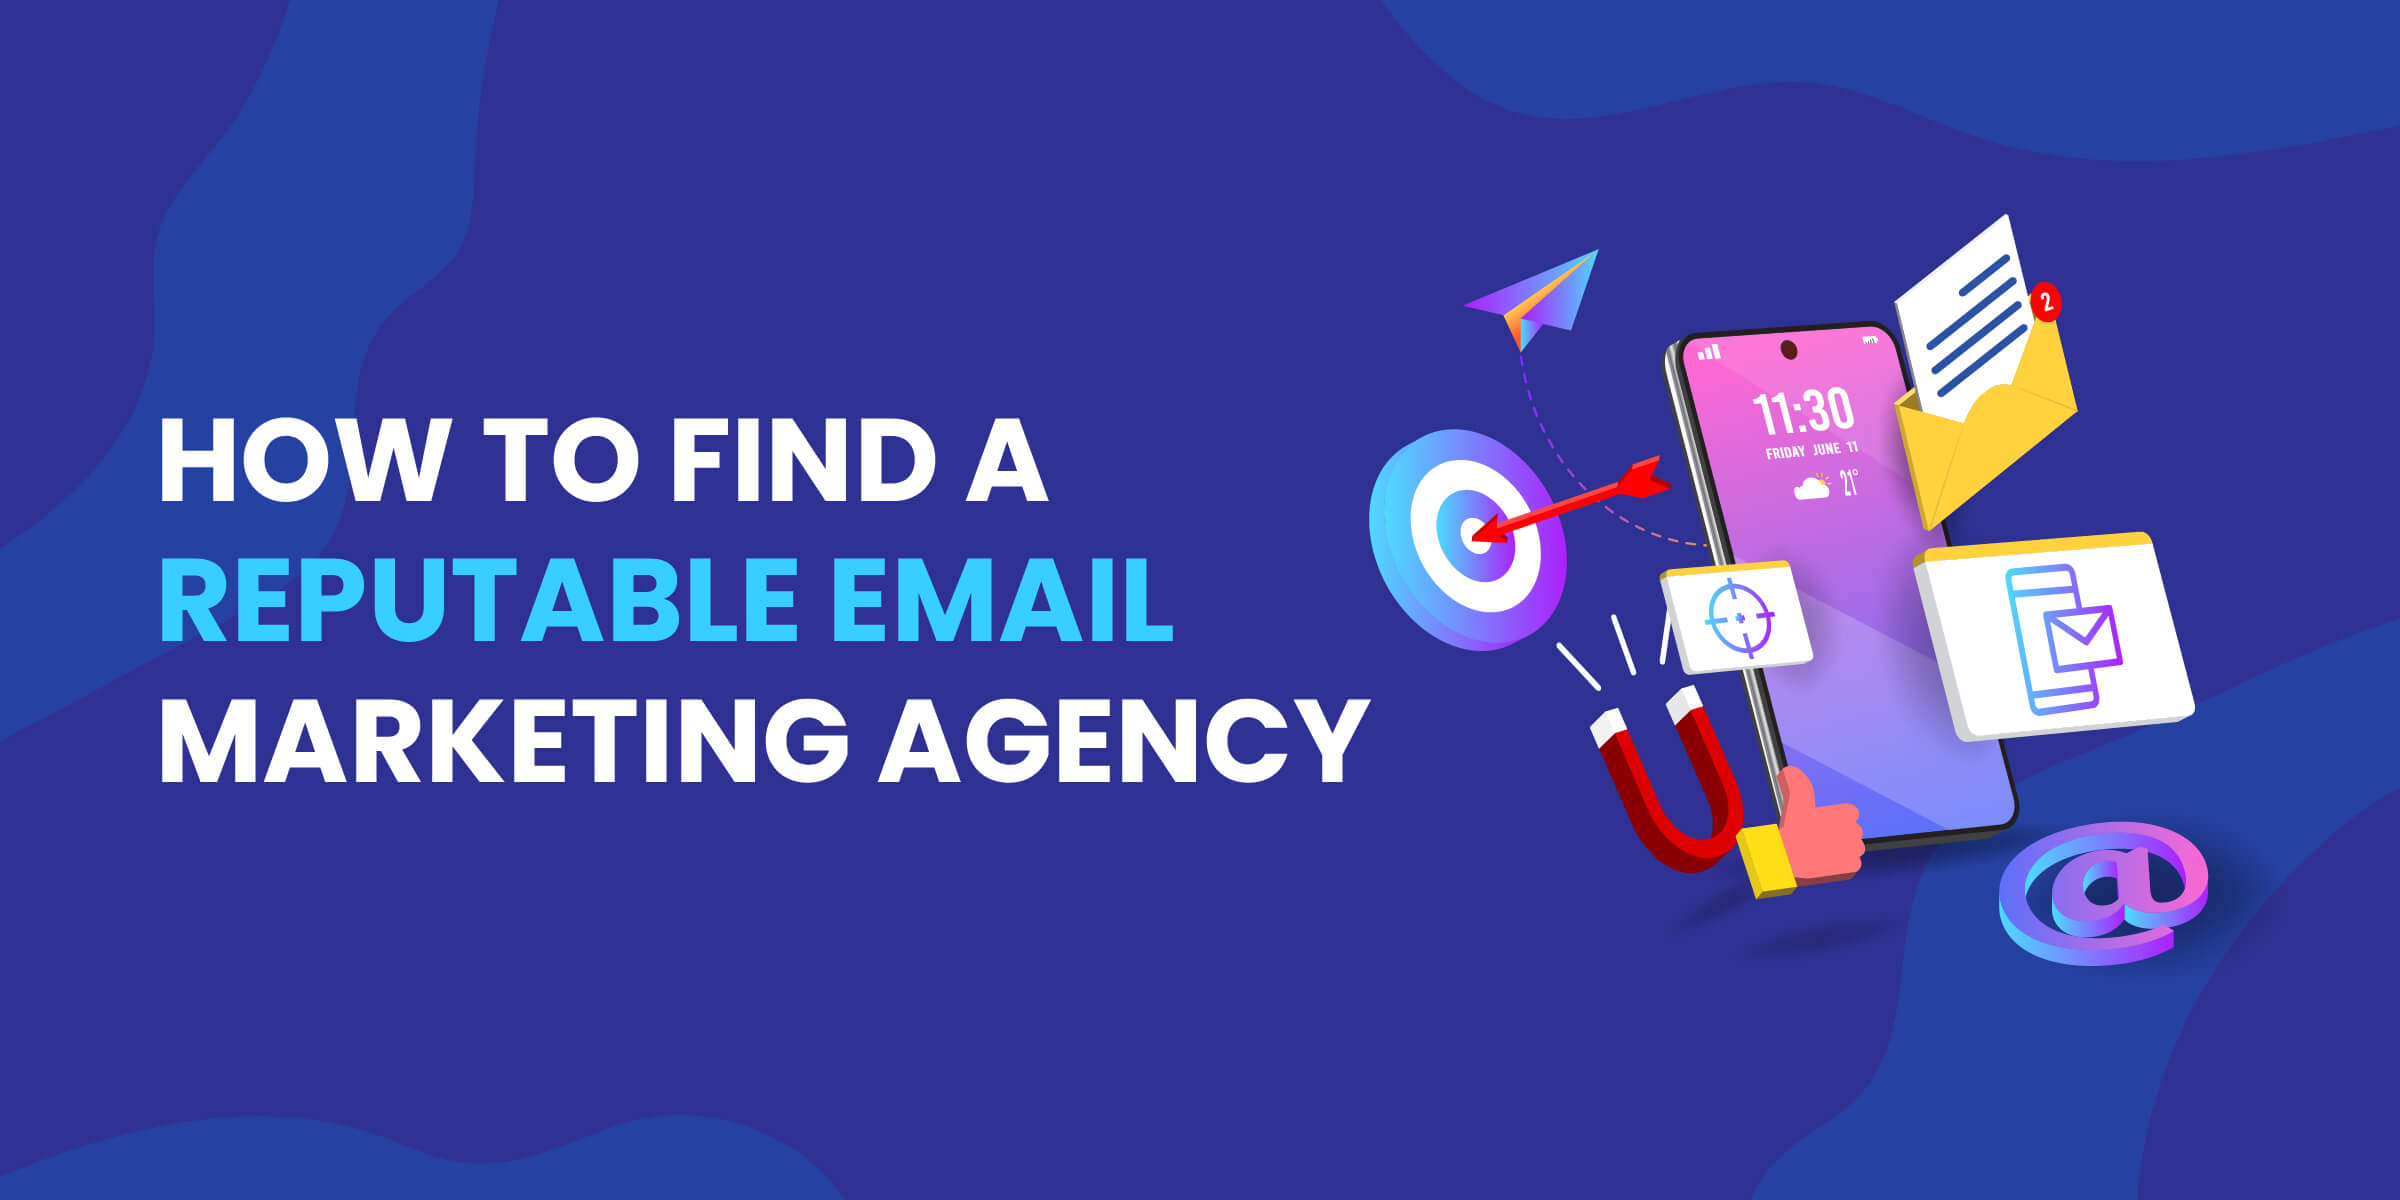 How to Find Reputable Email Marketing Agency